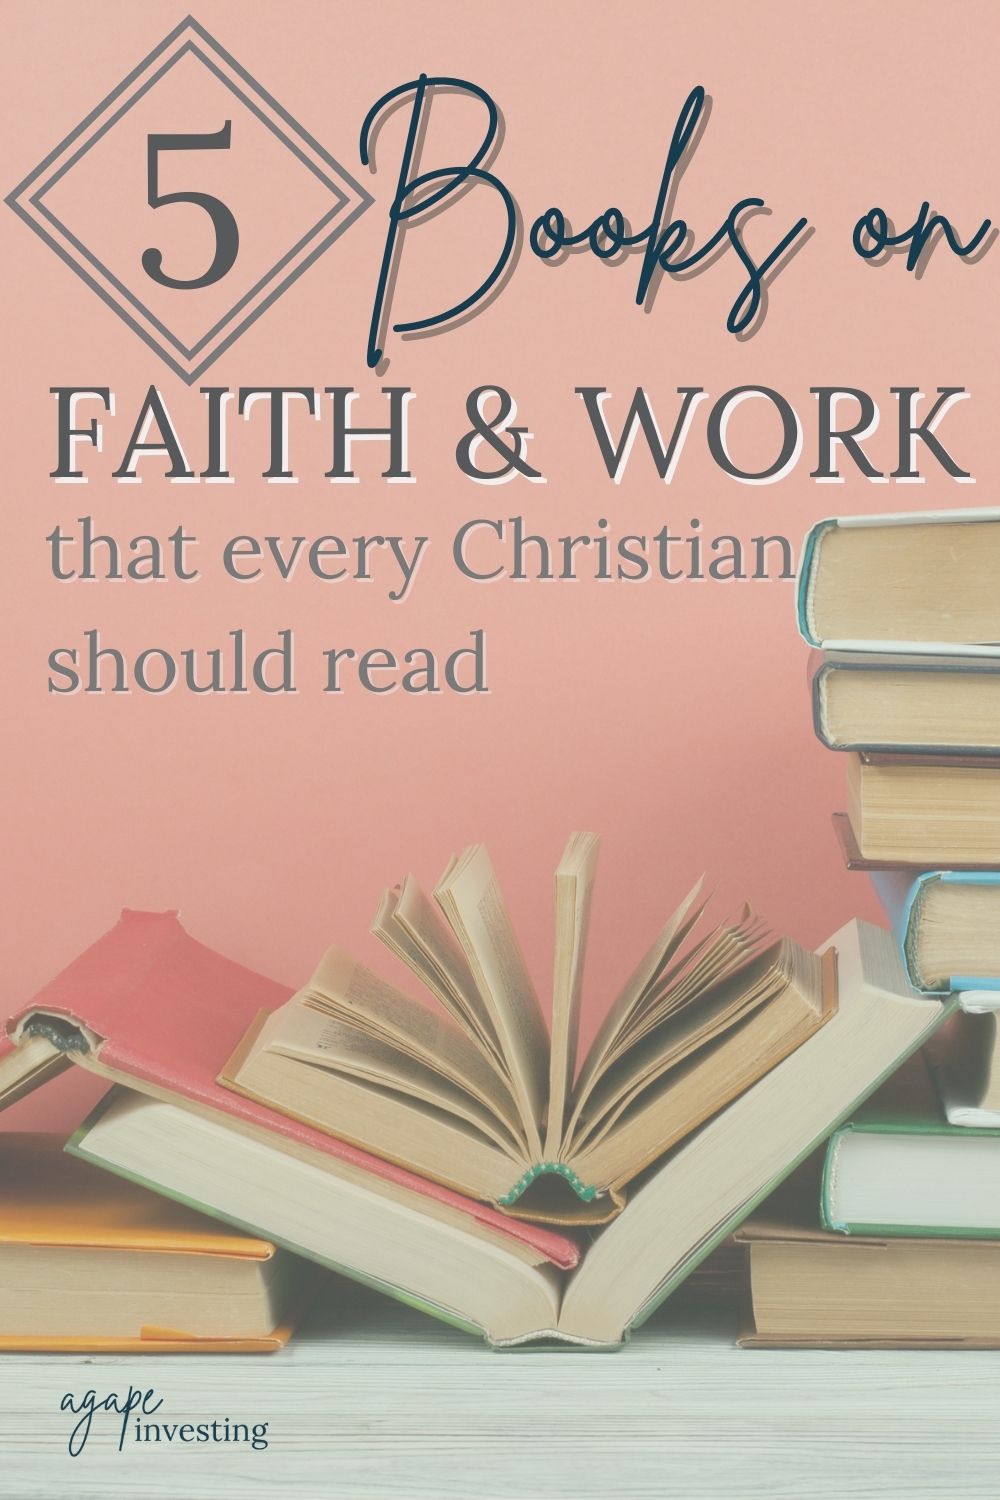 Here is a list of books on faith and work that I believe every Christian should read. These books aren’t just for those of us who are business professionals. No, these books are for EVERY Christian. They will challenge you and inspire you to be more active in implementing your faith into your work. #faithandwork #christianbooks #christianentrepreneurship